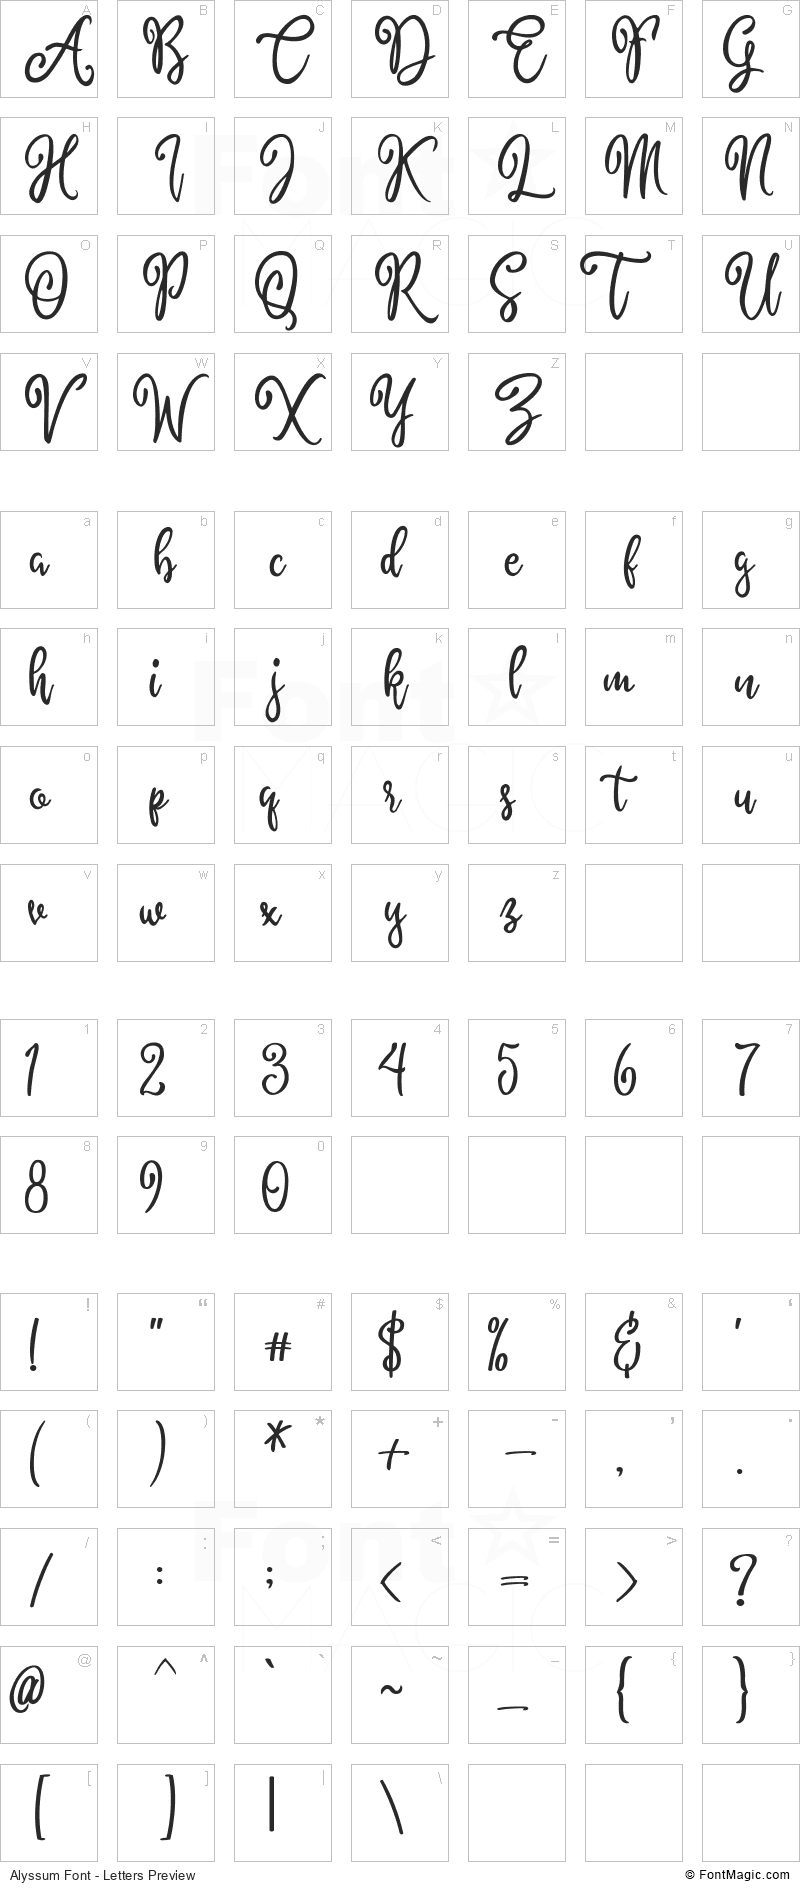 Alyssum Font - All Latters Preview Chart